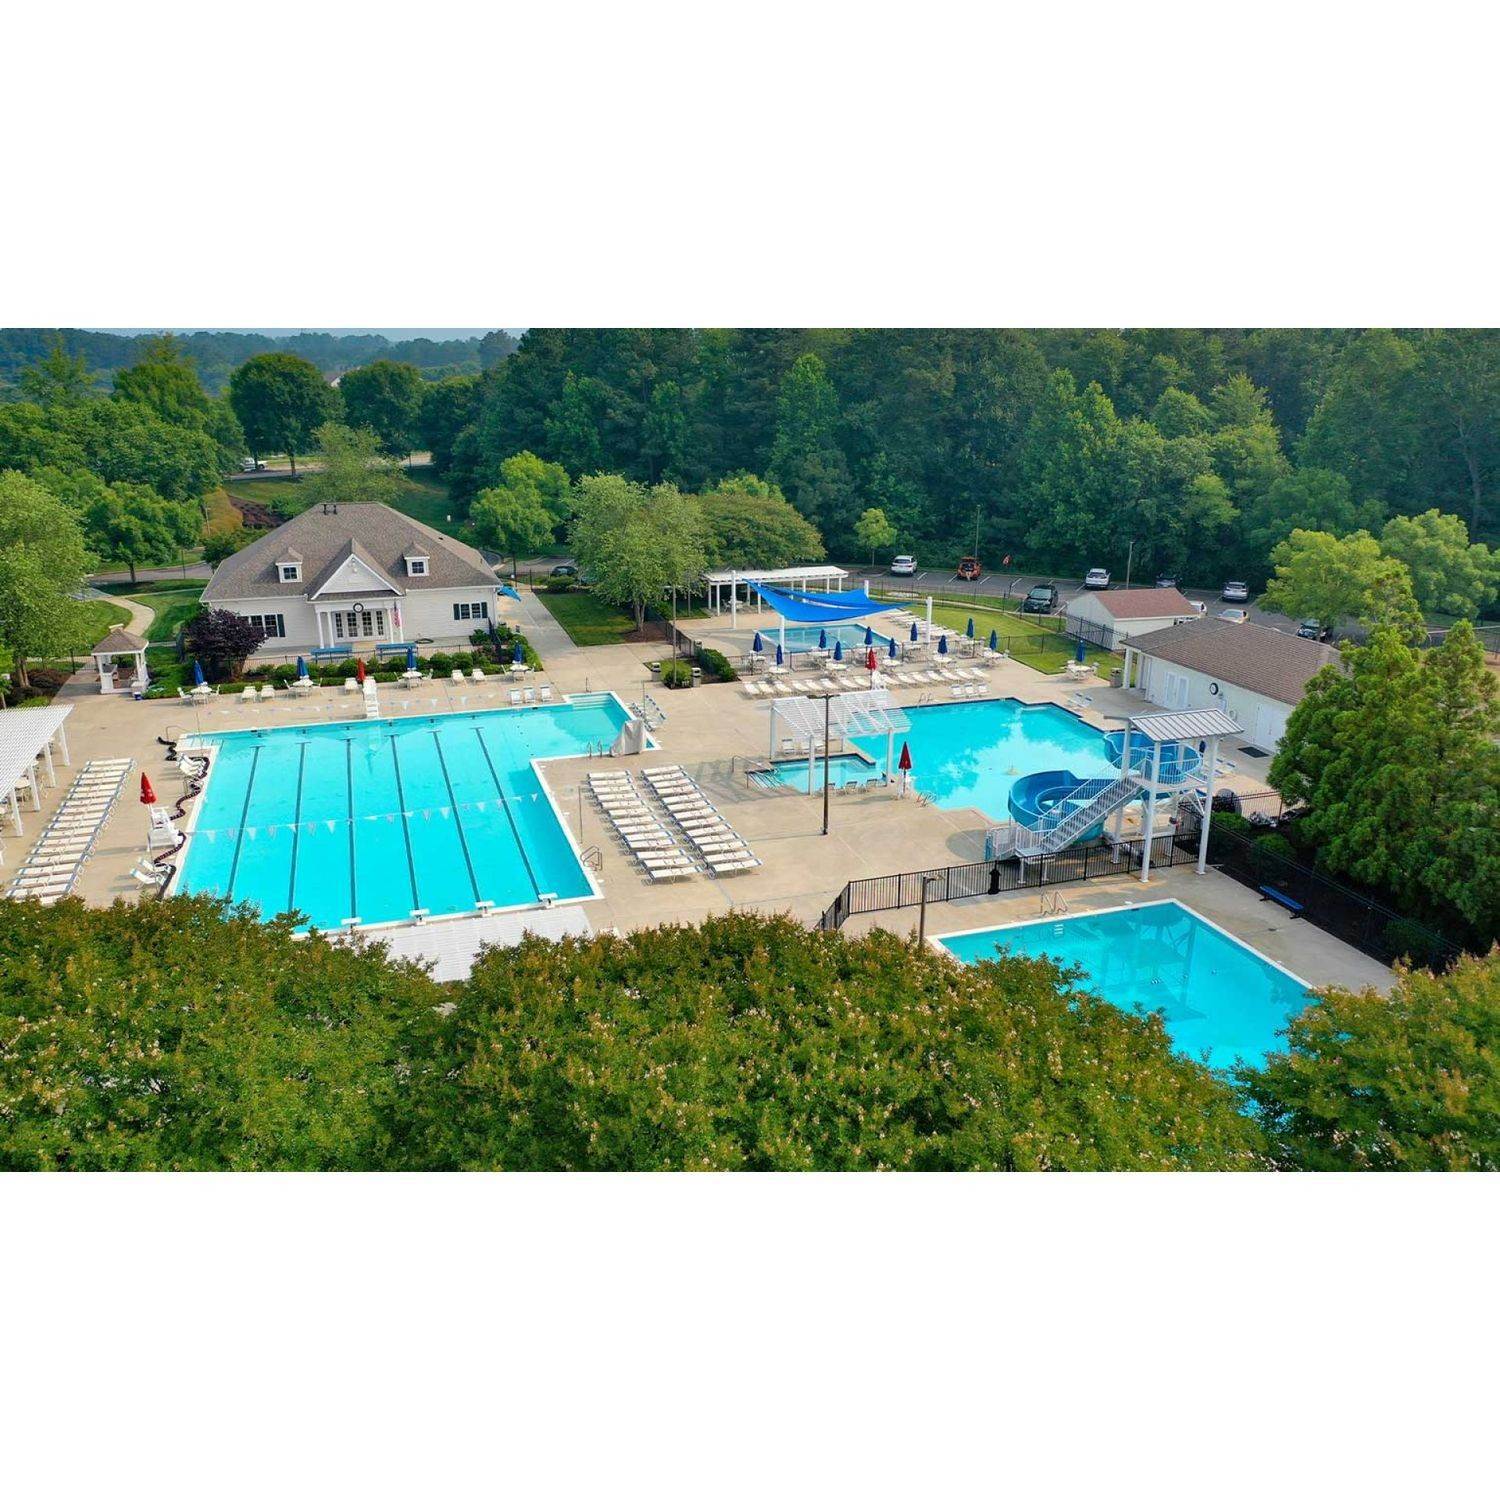 3. The Pointe at Twin Hickory Gebäude bei 4605 Pouncey Tract Road, Glen Allen, VA 23059